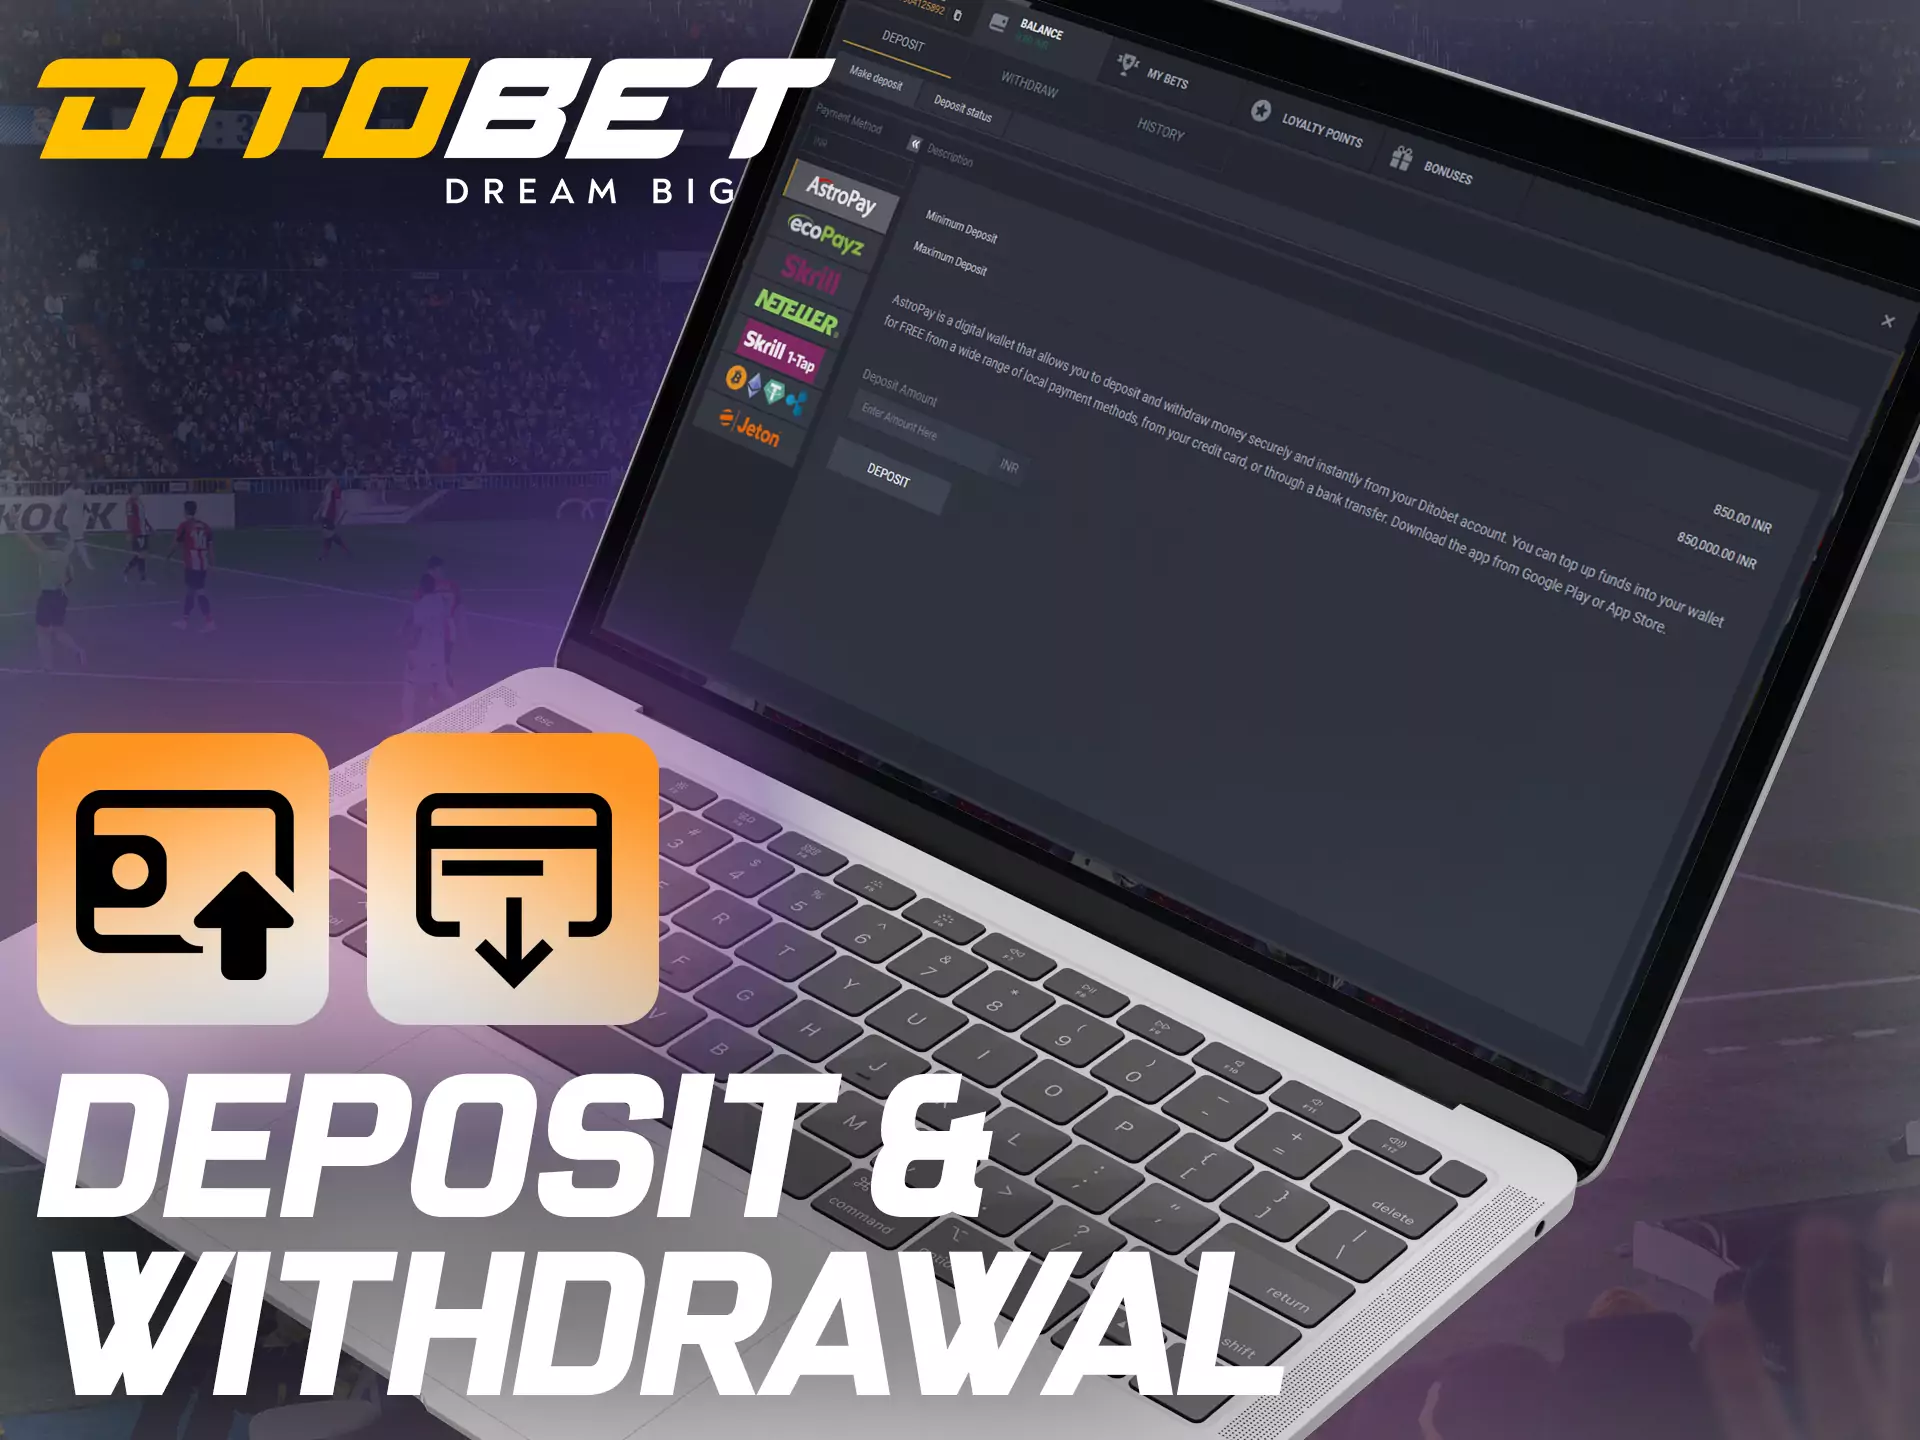 Ditobet offers many convenient ways to deposit and withdraw money.